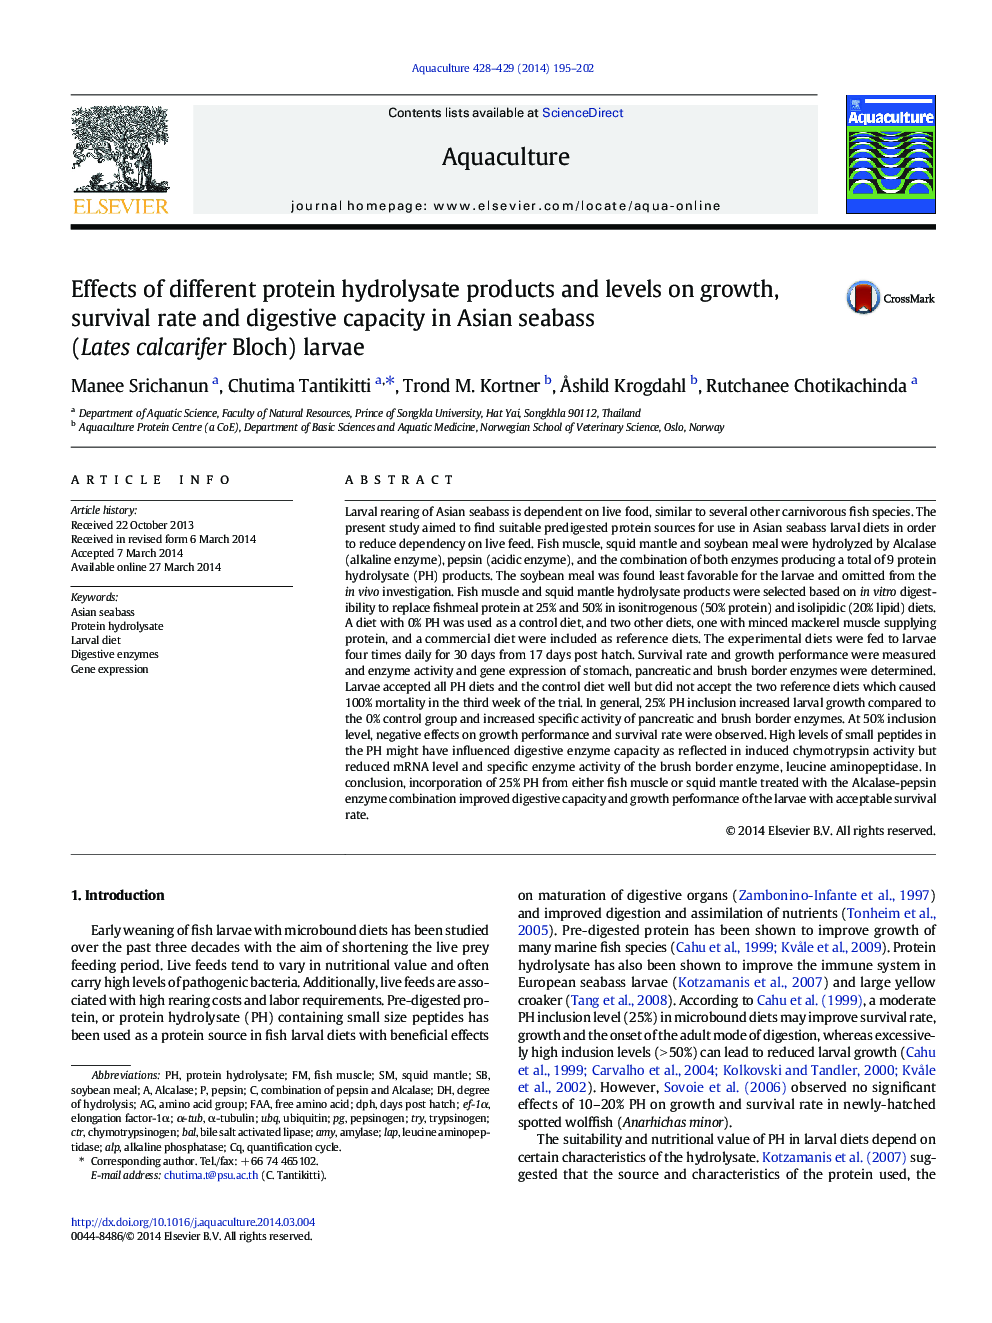 Effects of different protein hydrolysate products and levels on growth, survival rate and digestive capacity in Asian seabass (Lates calcarifer Bloch) larvae